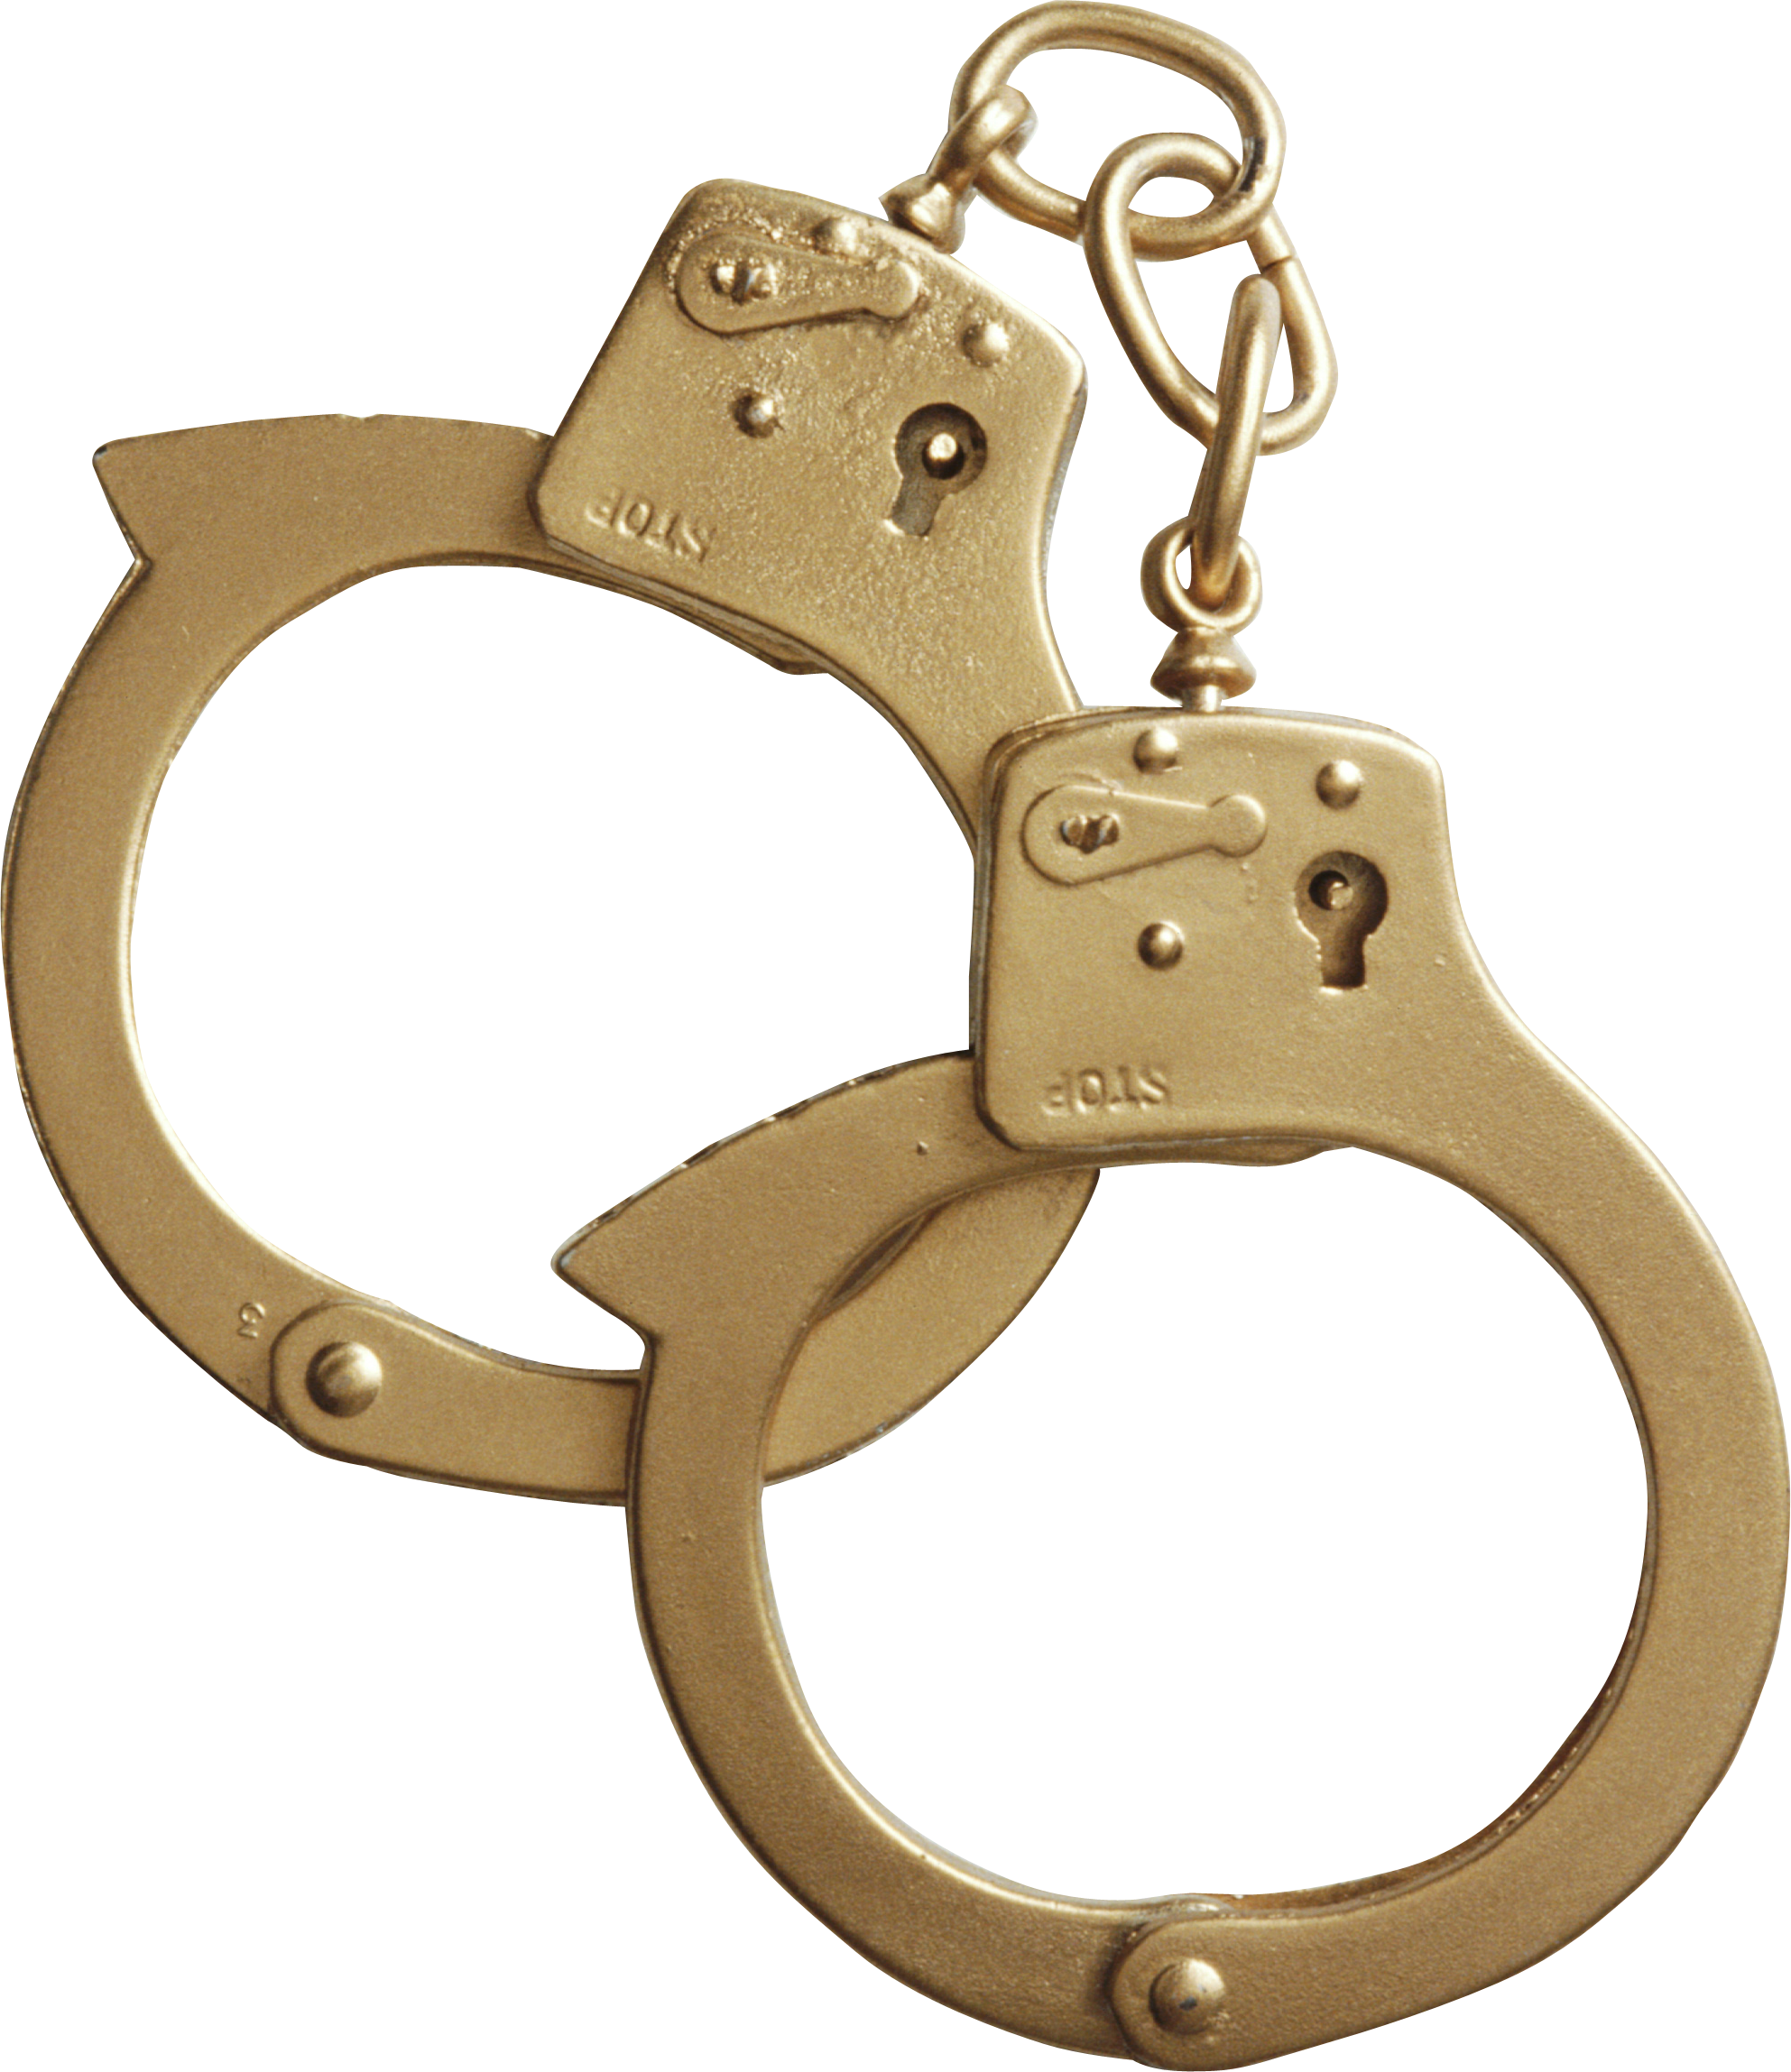 Png . Handcuffs clipart gold